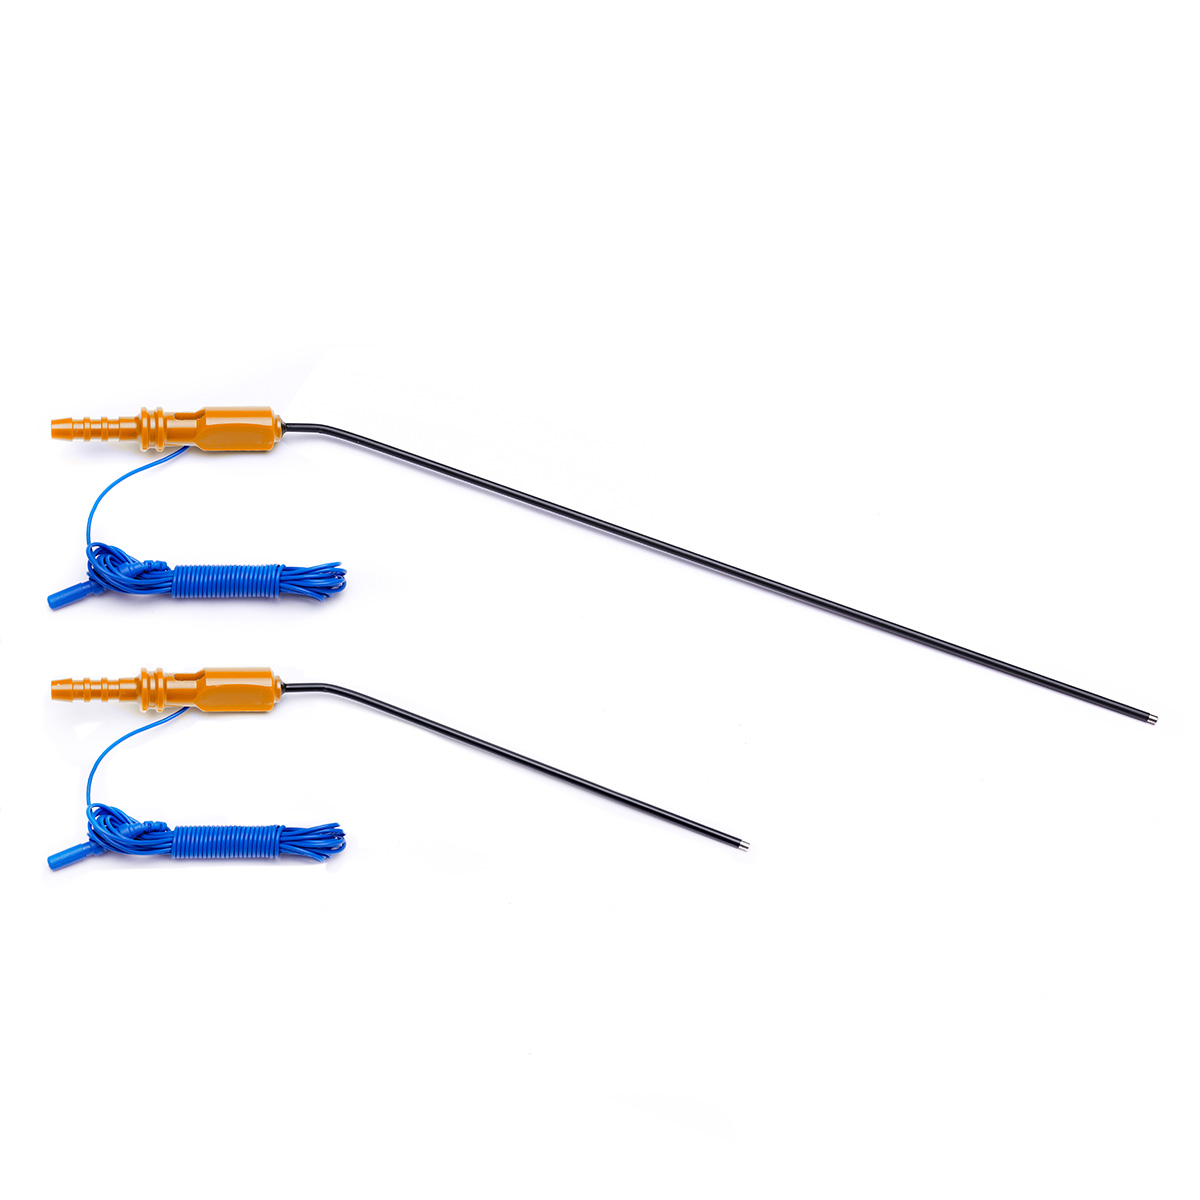 Intraoperative neuromonitoring Frazier suction probe integrated with EMG stimulation